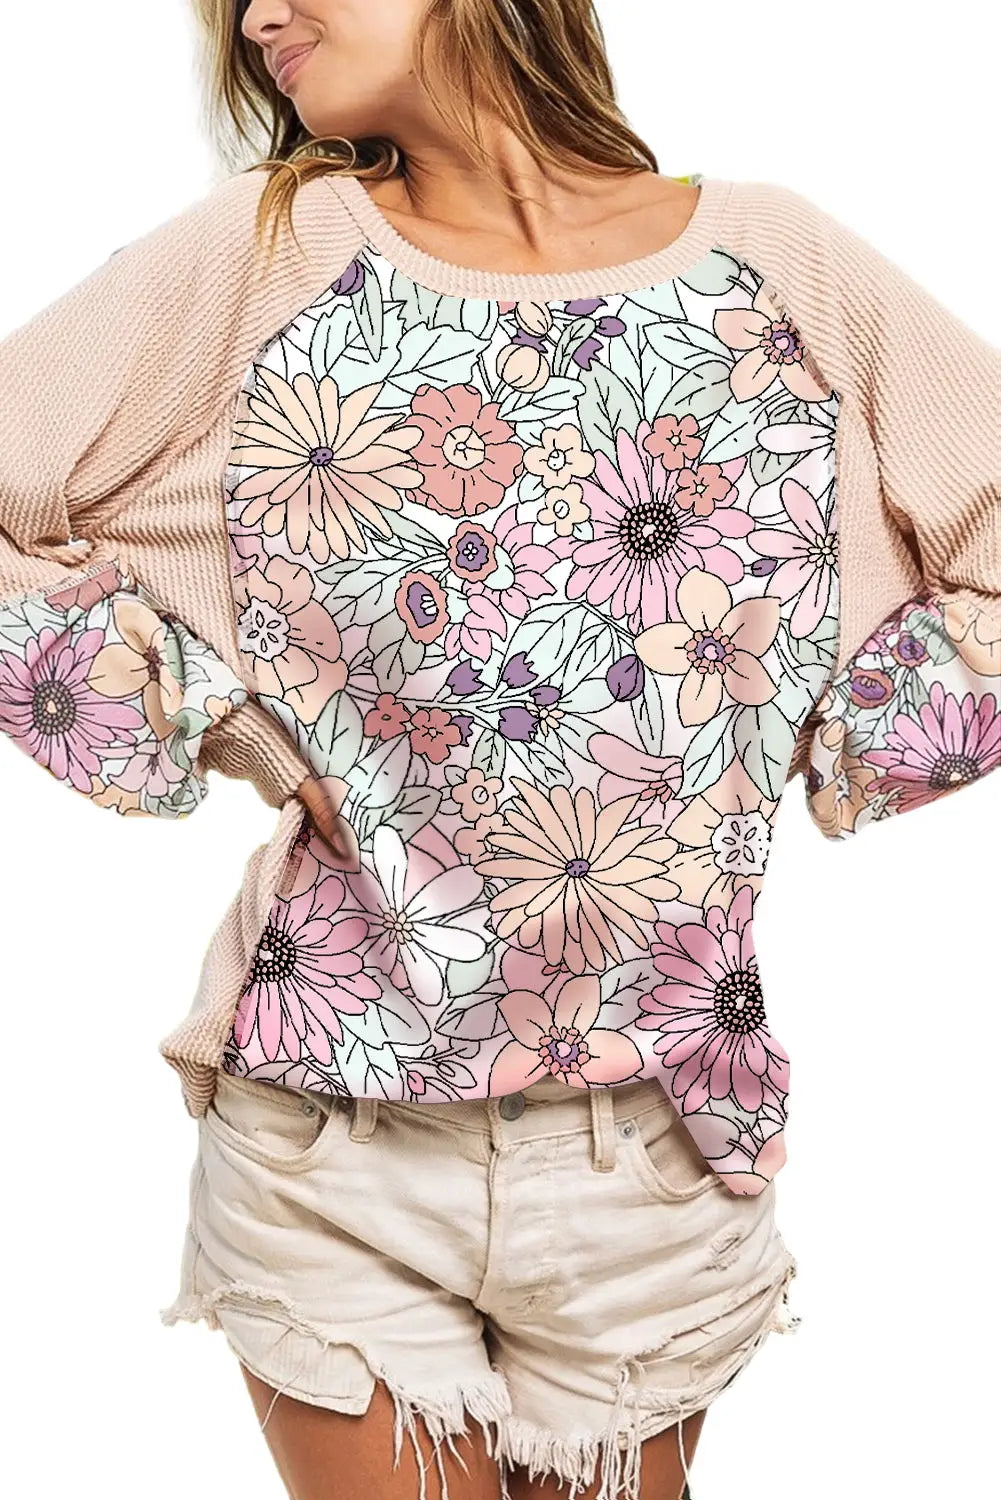 Oatmeal corded floral patchwork long sleeve top - tops